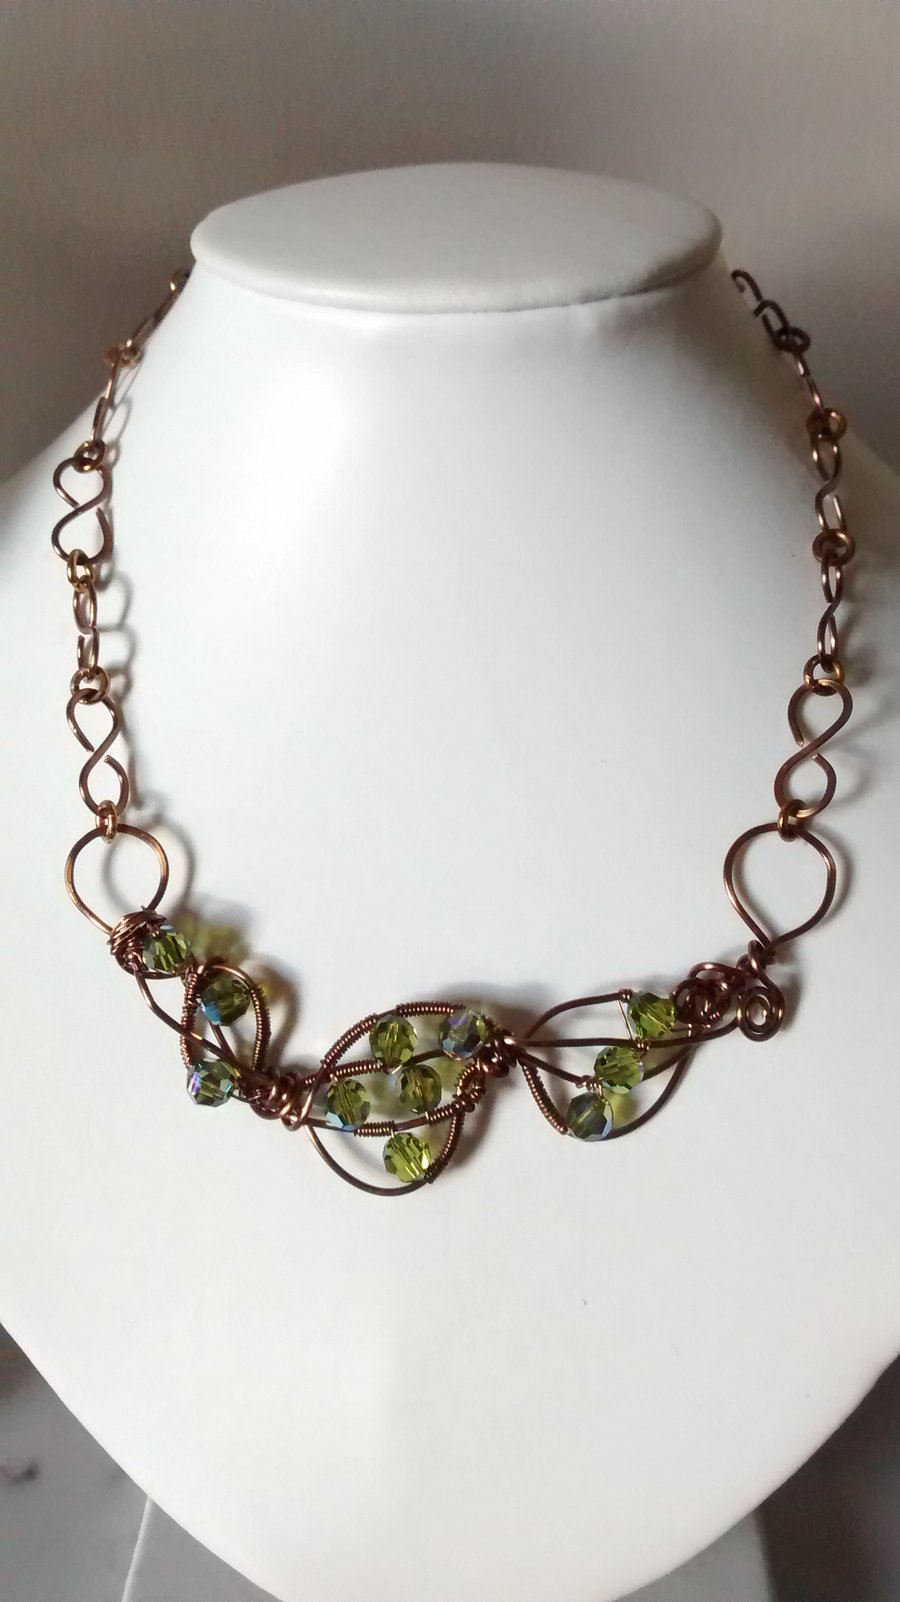 PERIDOT AND ANTIQUE BRONZE WIRE NECKLACE - FREE SHIPPING WORLDWIDE